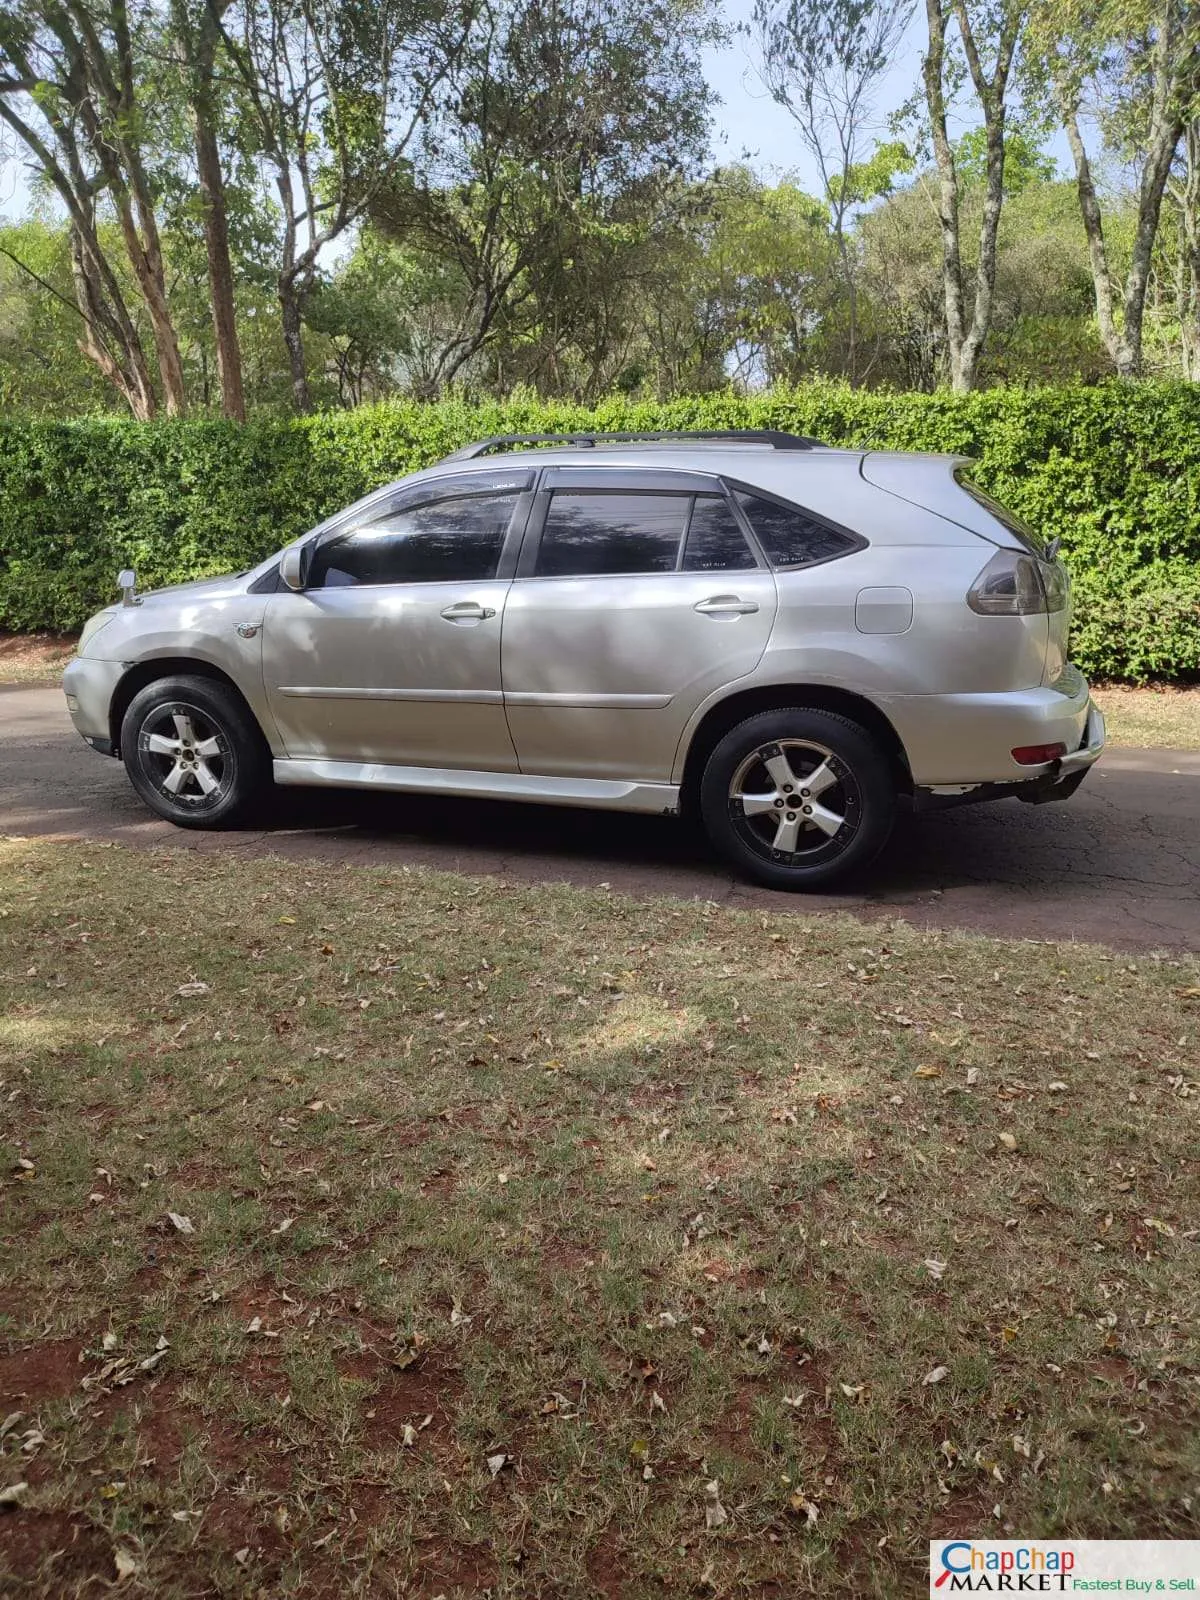 Cars Cars For Sale/Vehicles-Toyota Harrier QUICK SALE 699k You Pay 30% Deposit 70% installments Trade in OK EXCLUSIVE 9